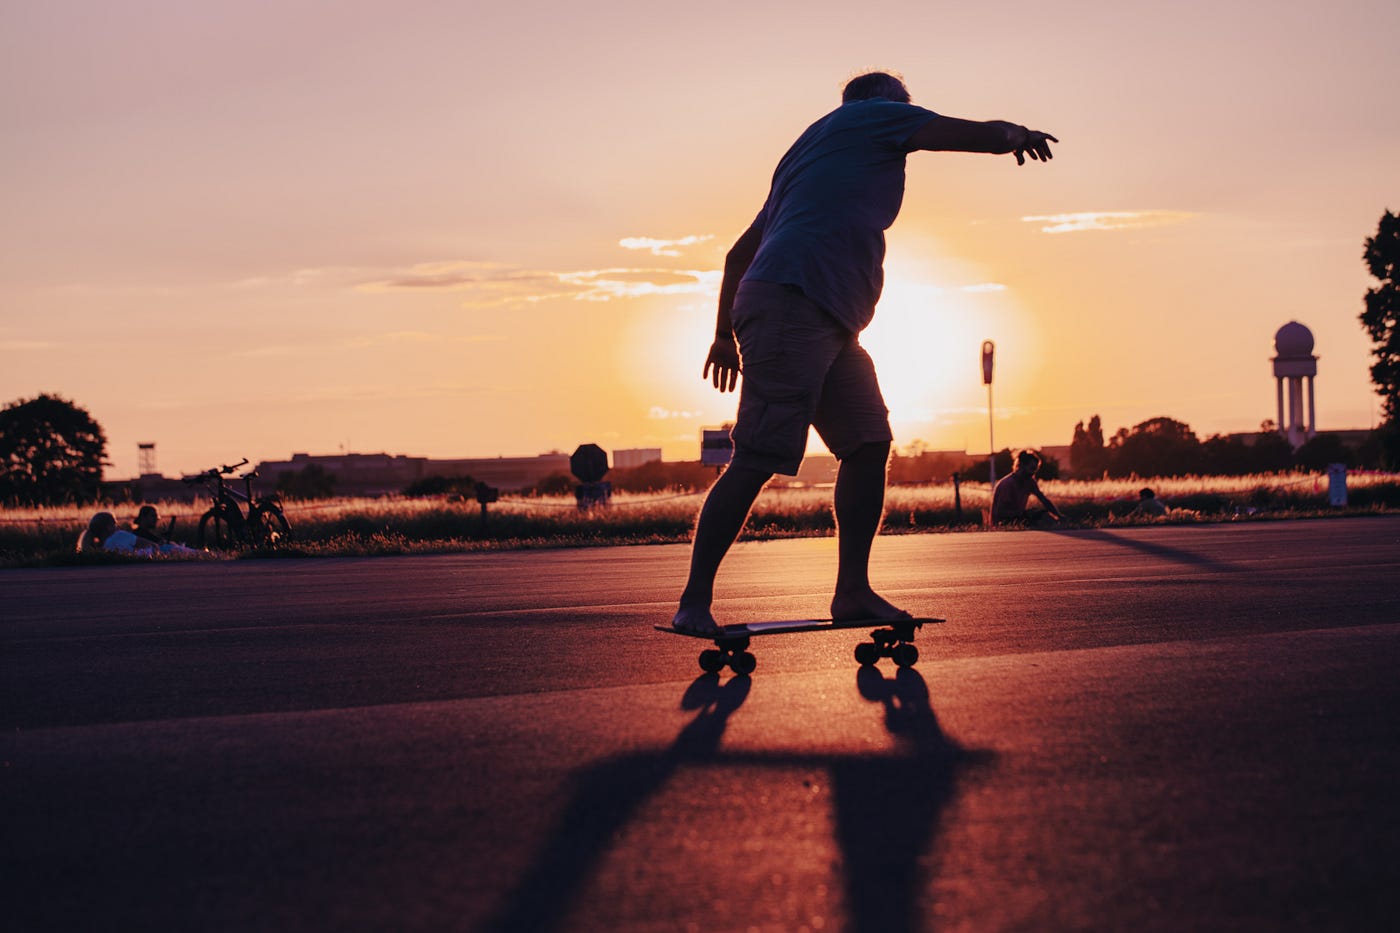 An overweight  man rides a skateboard as the sun sets in the distance.